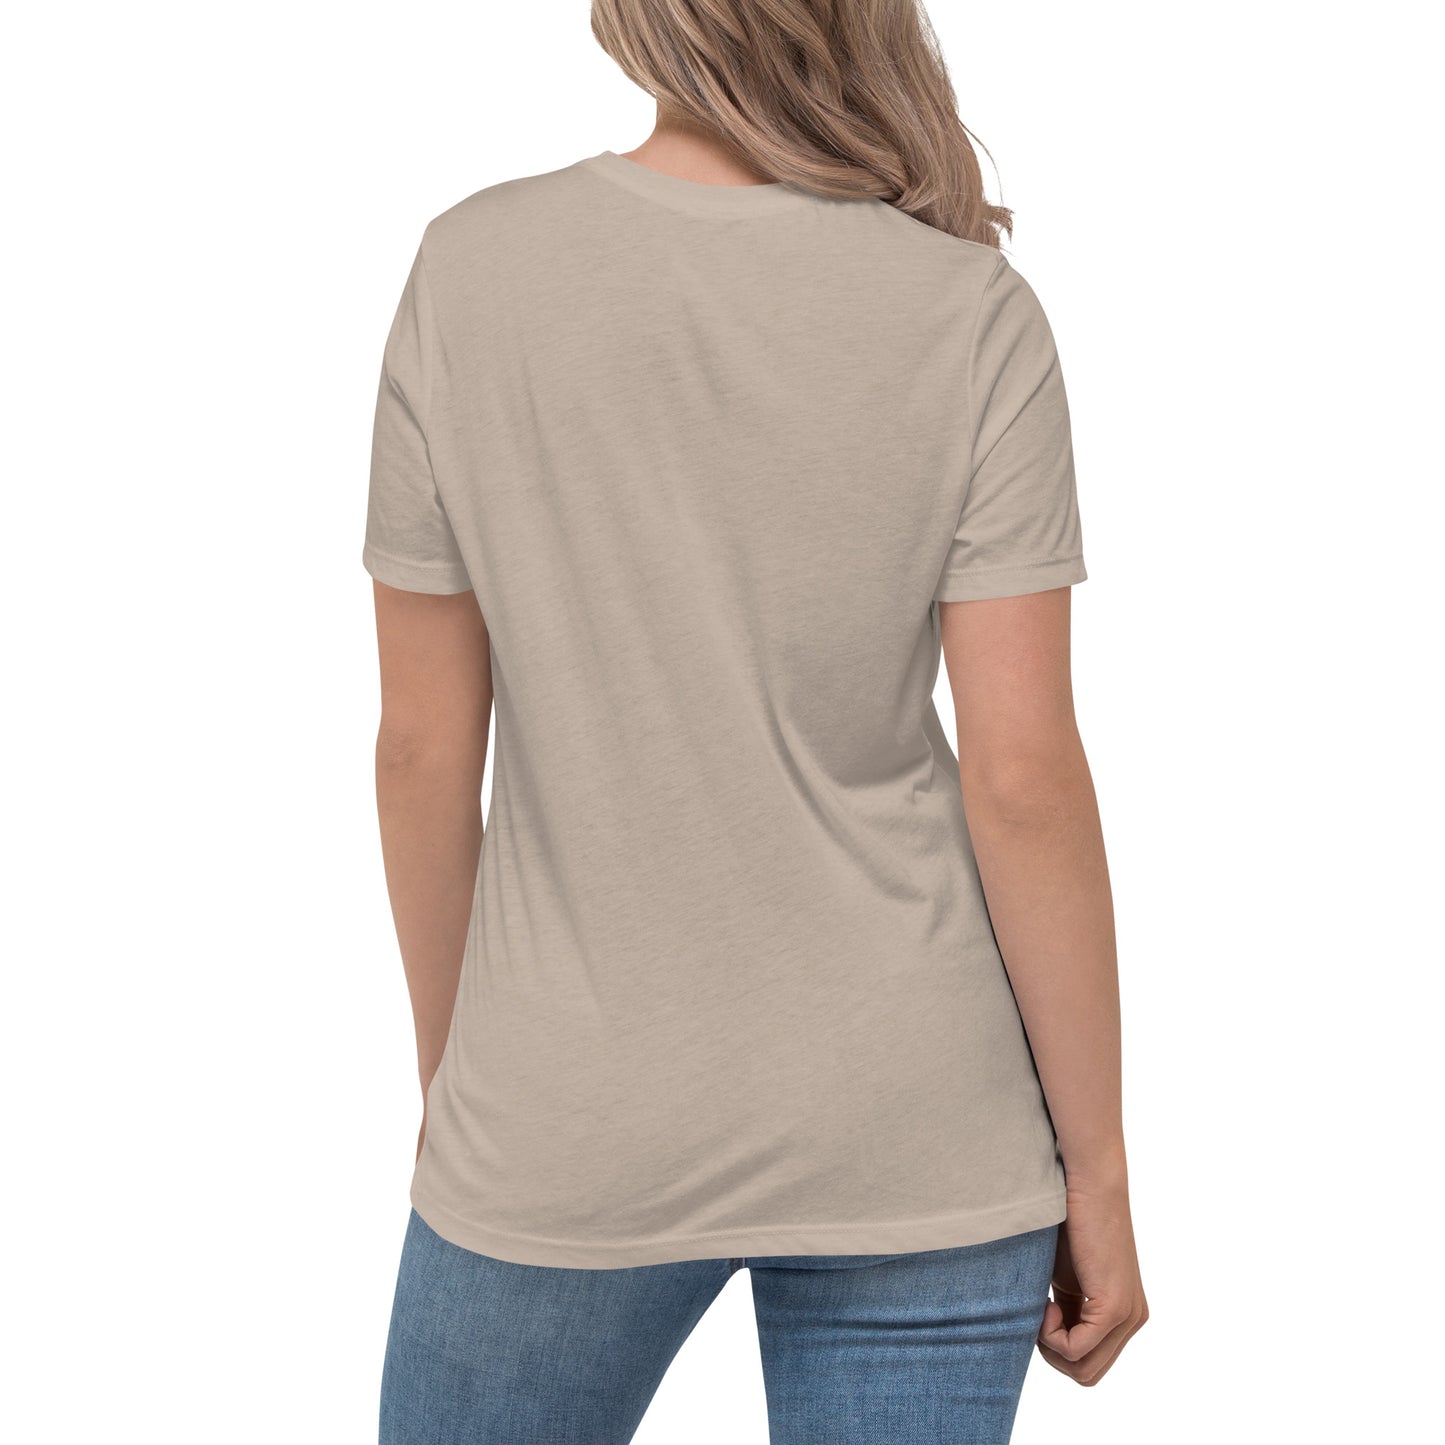 Limited Edition — Women's Relaxed Tee